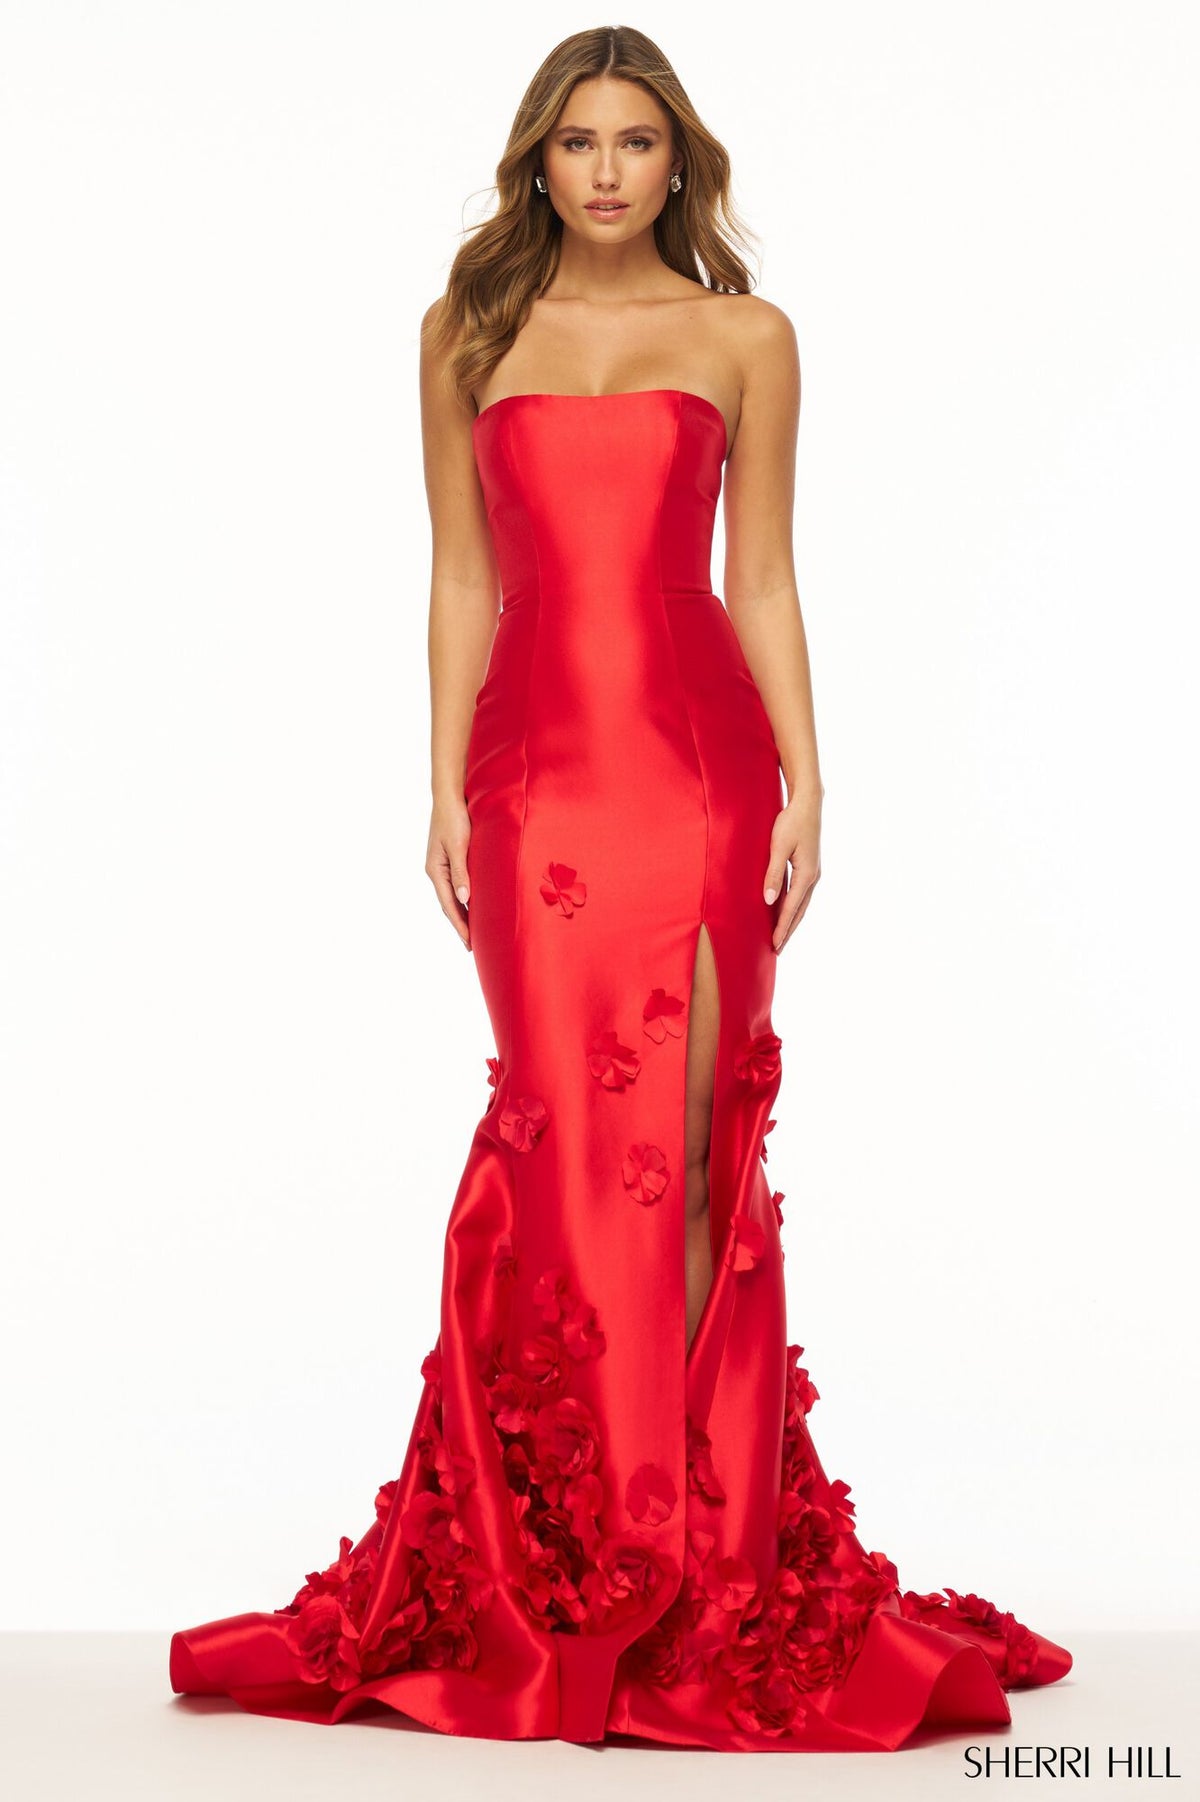 Sherri Hill 56235 Strapless Mikado Prom Gown with 3D Flowers - An elegant prom gown featuring a strapless mikado design, 3D flower embellishments, and a skirt slit for a luxurious and romantic look.